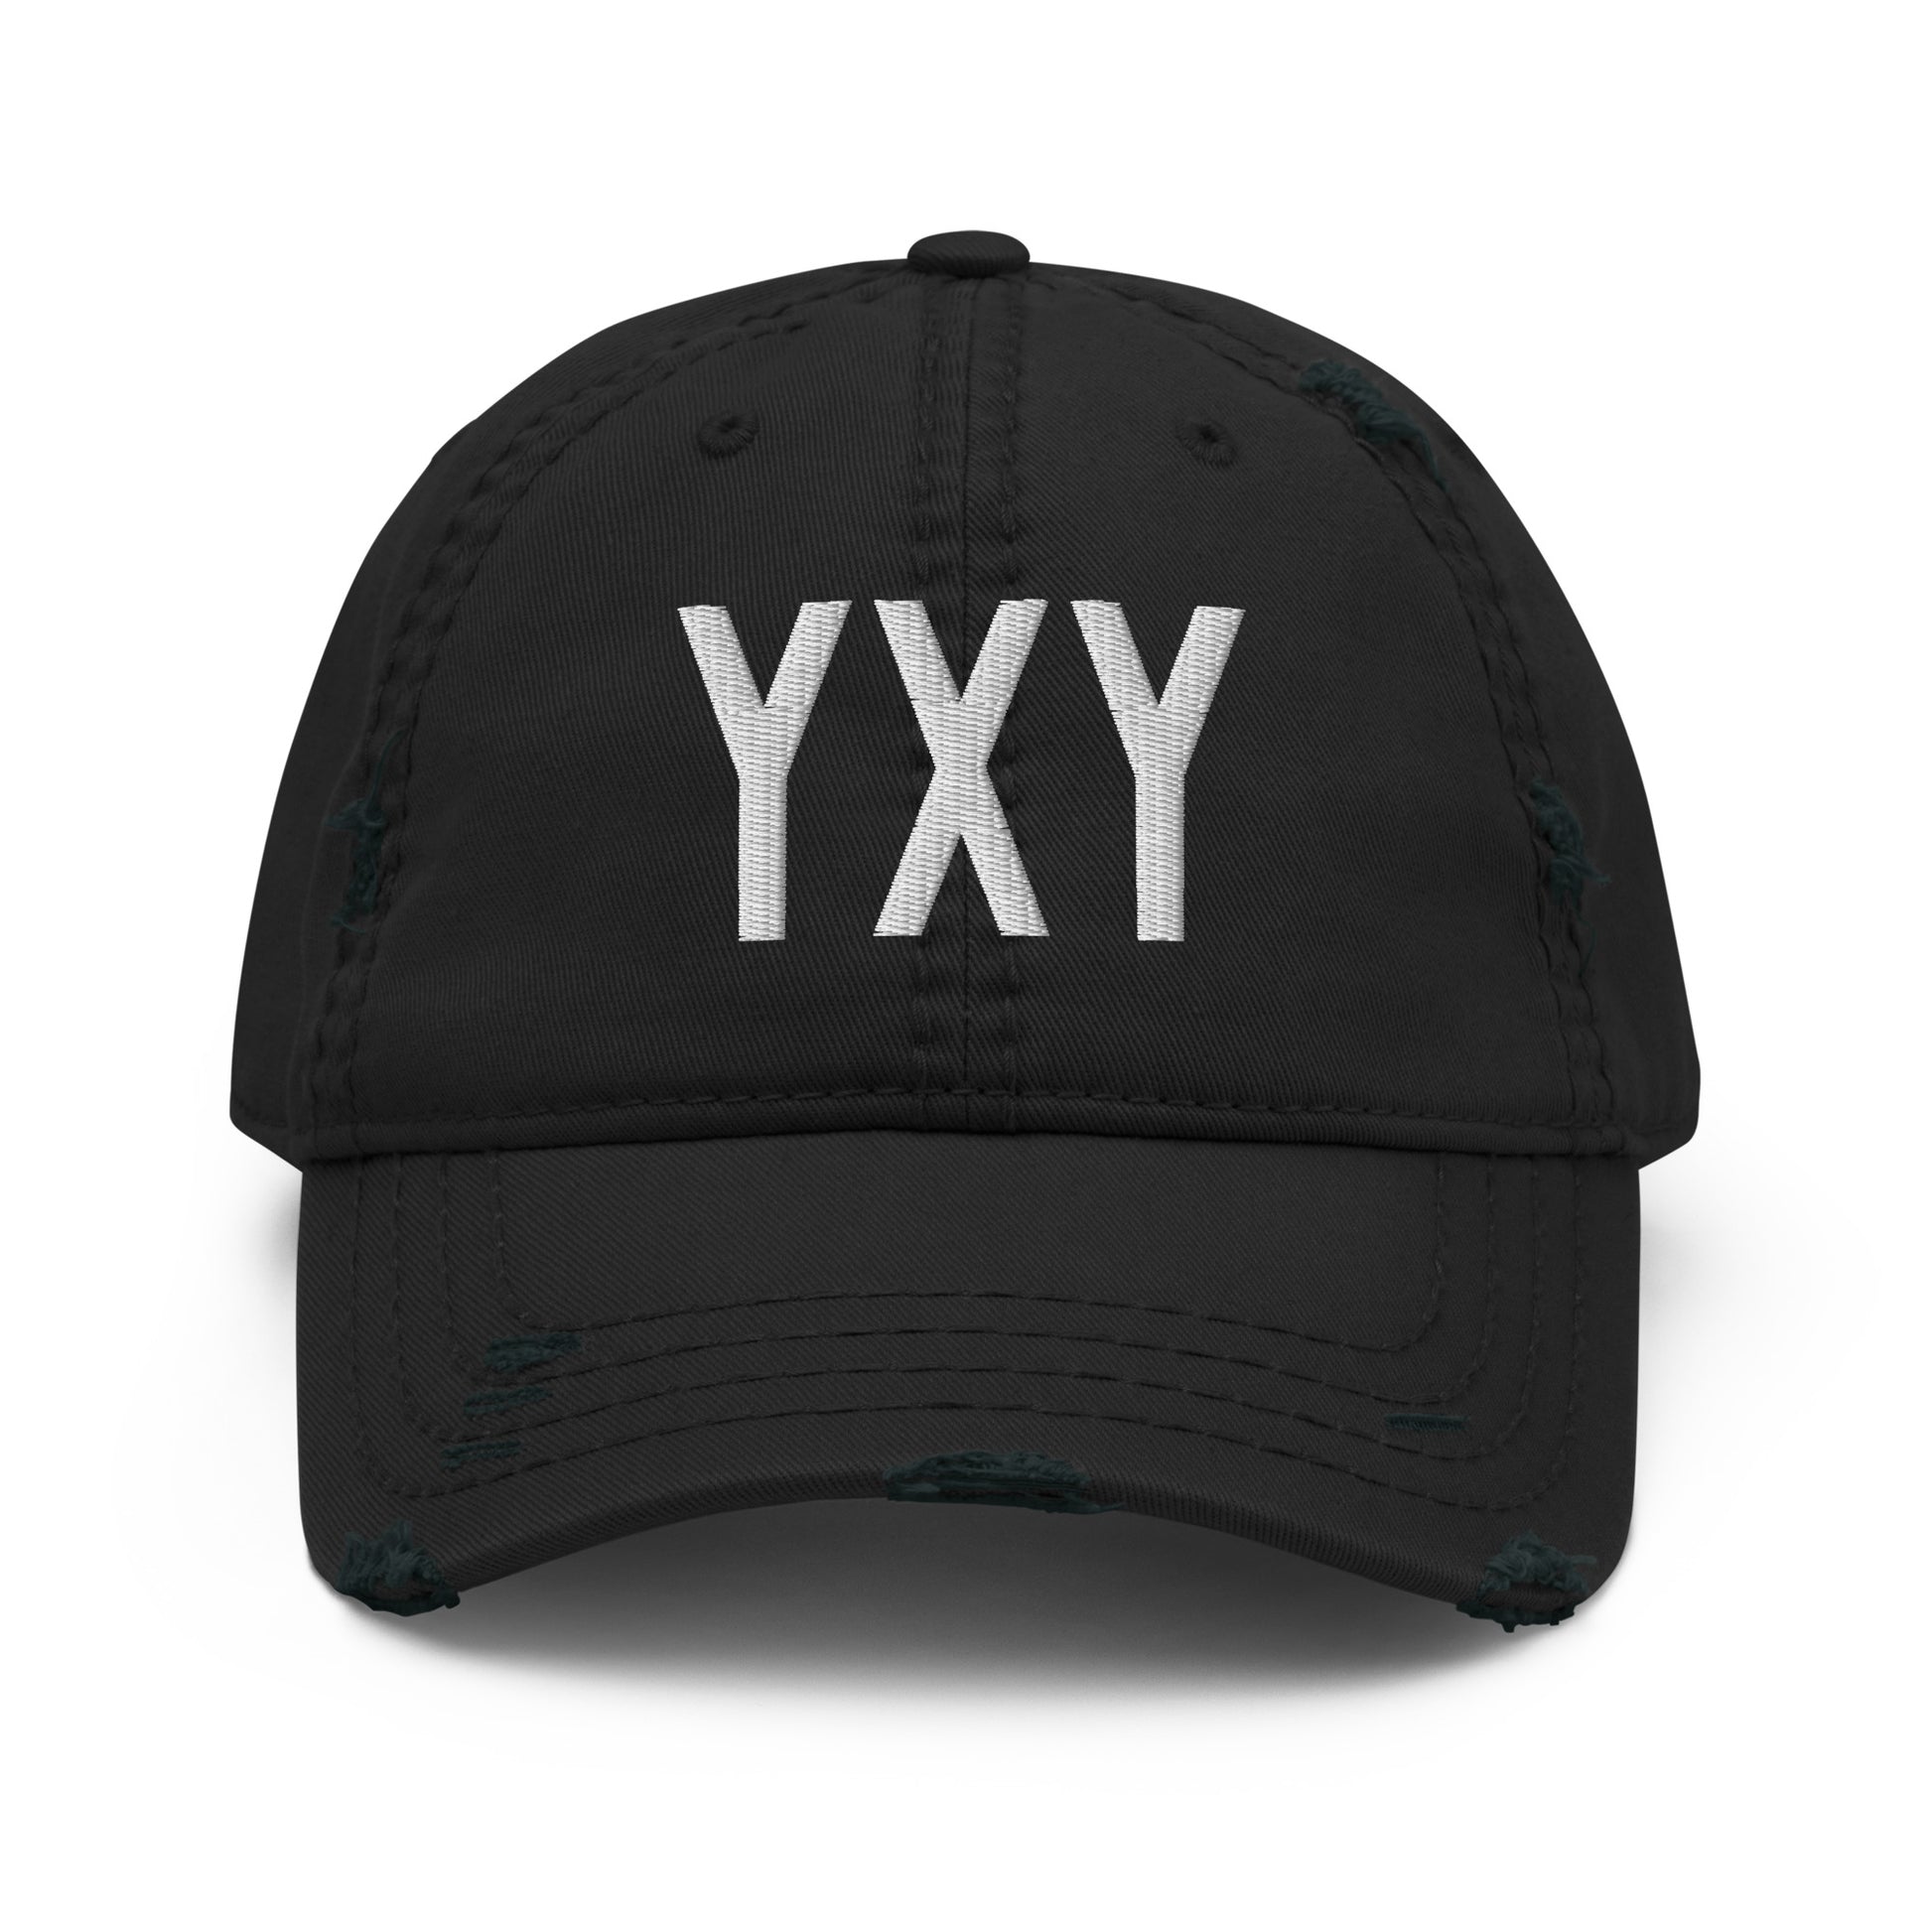 Airport Code Distressed Hat - White • YXY Whitehorse • YHM Designs - Image 10